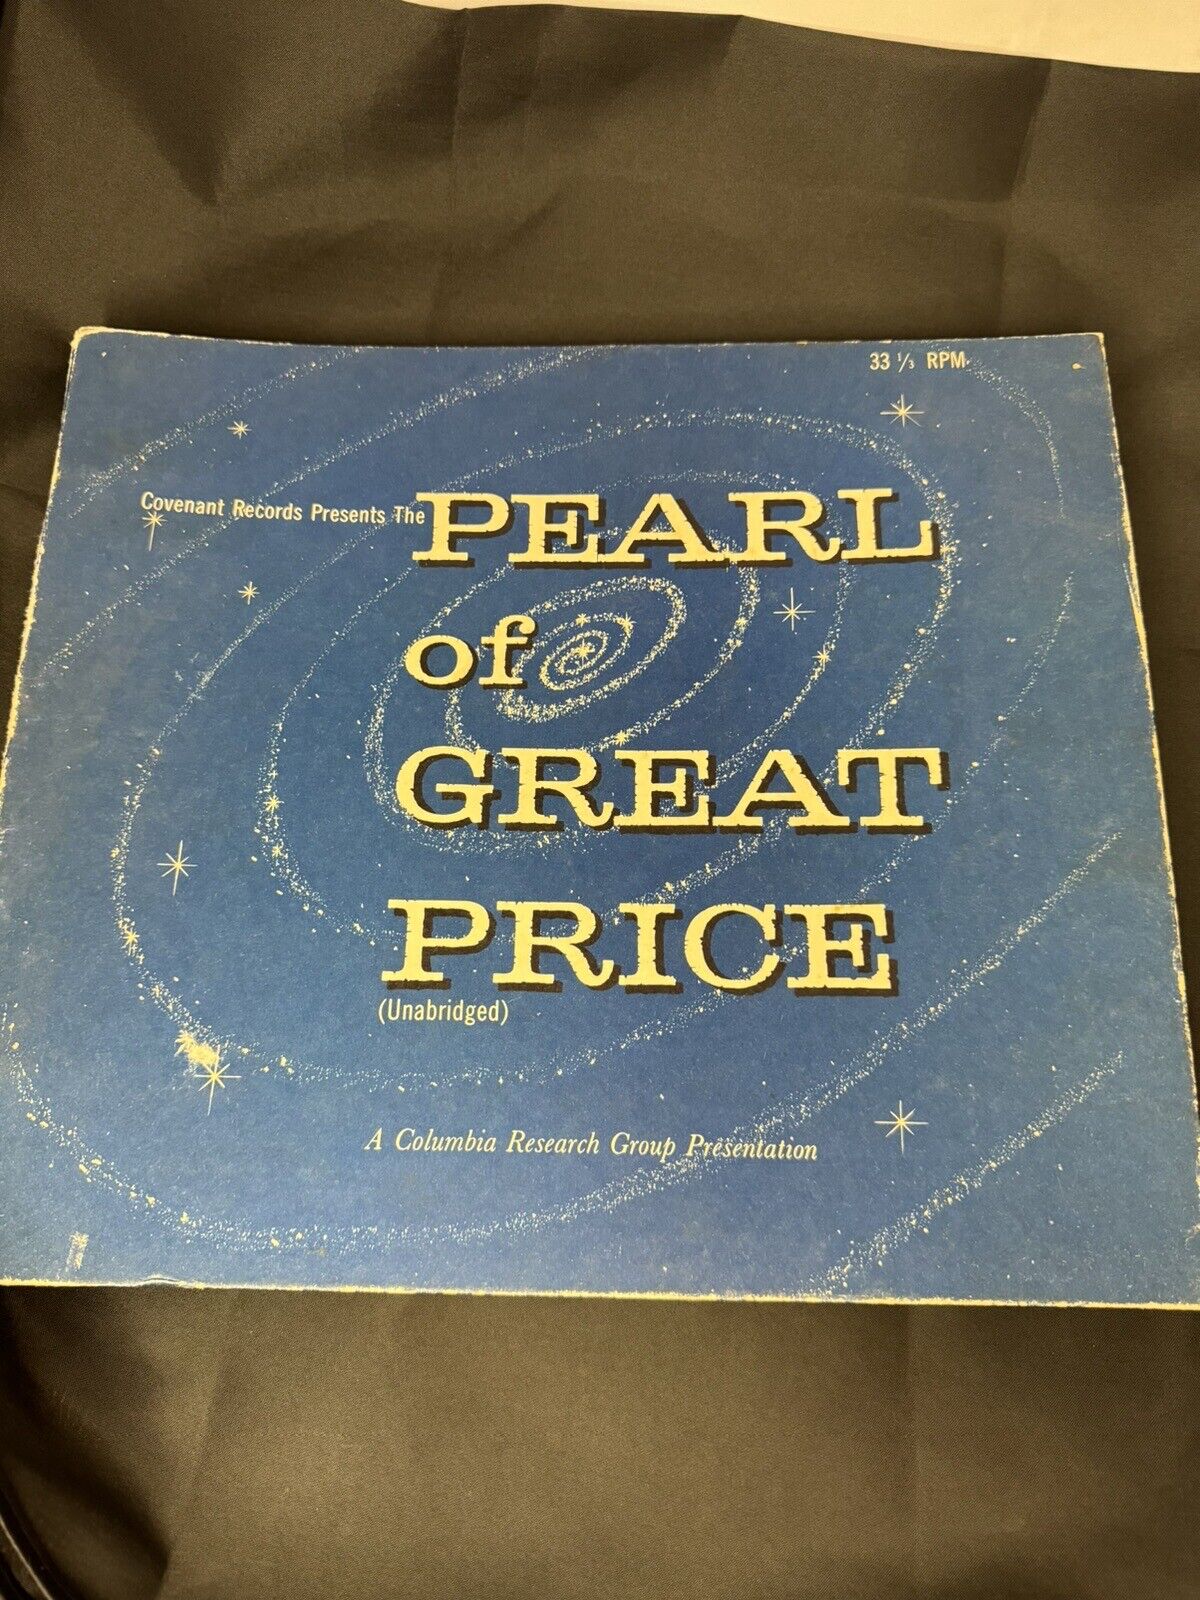 Vintage LDS Pearl Of Great Price Vinyl Record Set Covenant Records 33 1/3 RPM